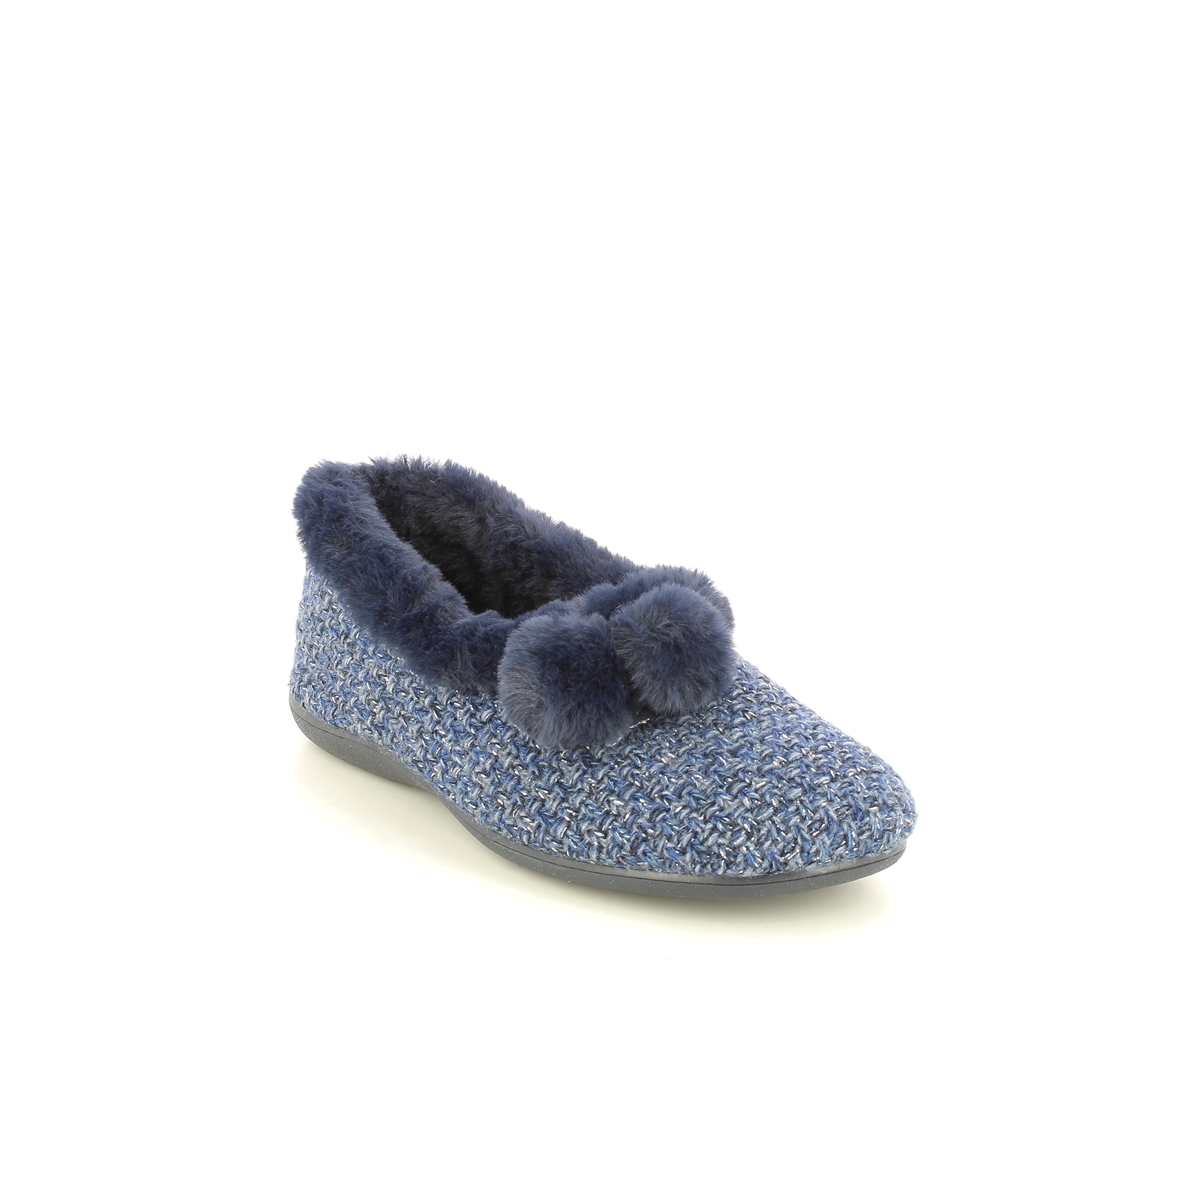 Lotus Alice Navy Womens slipper mules in a Plain Textile in Size 7